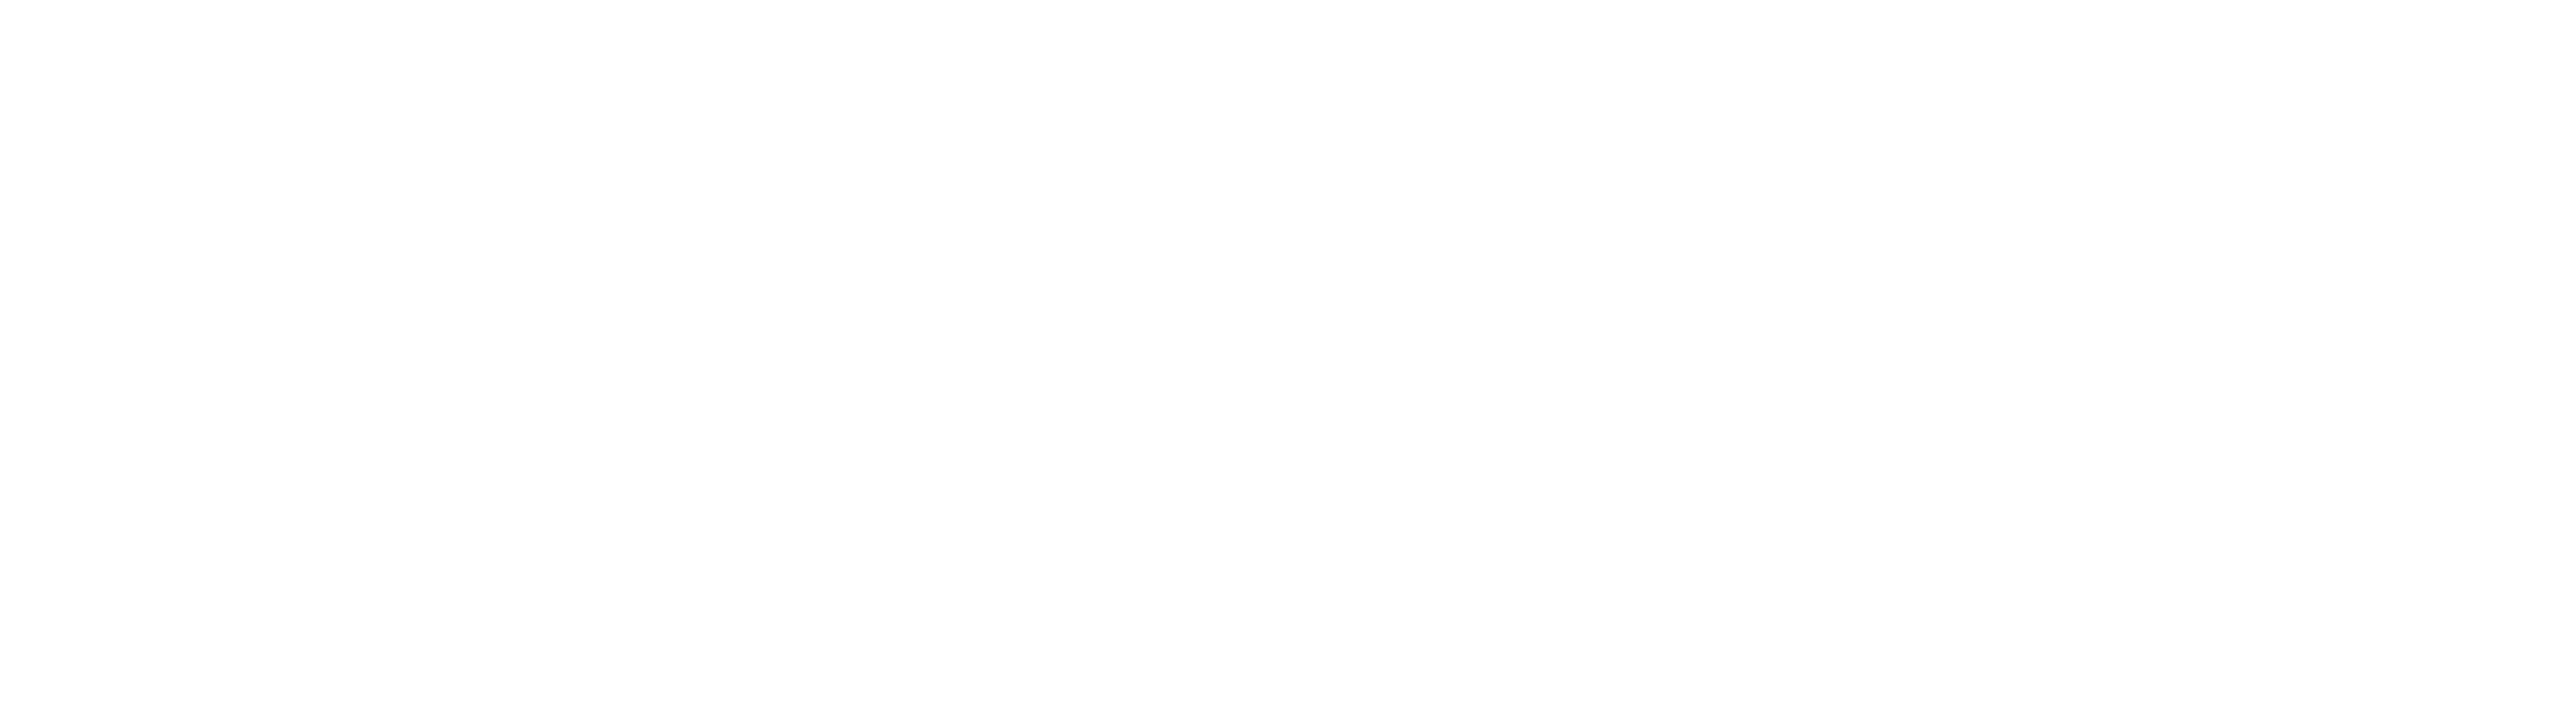 FACULTY OF SECURITY ENGINEERING - University of Žilina